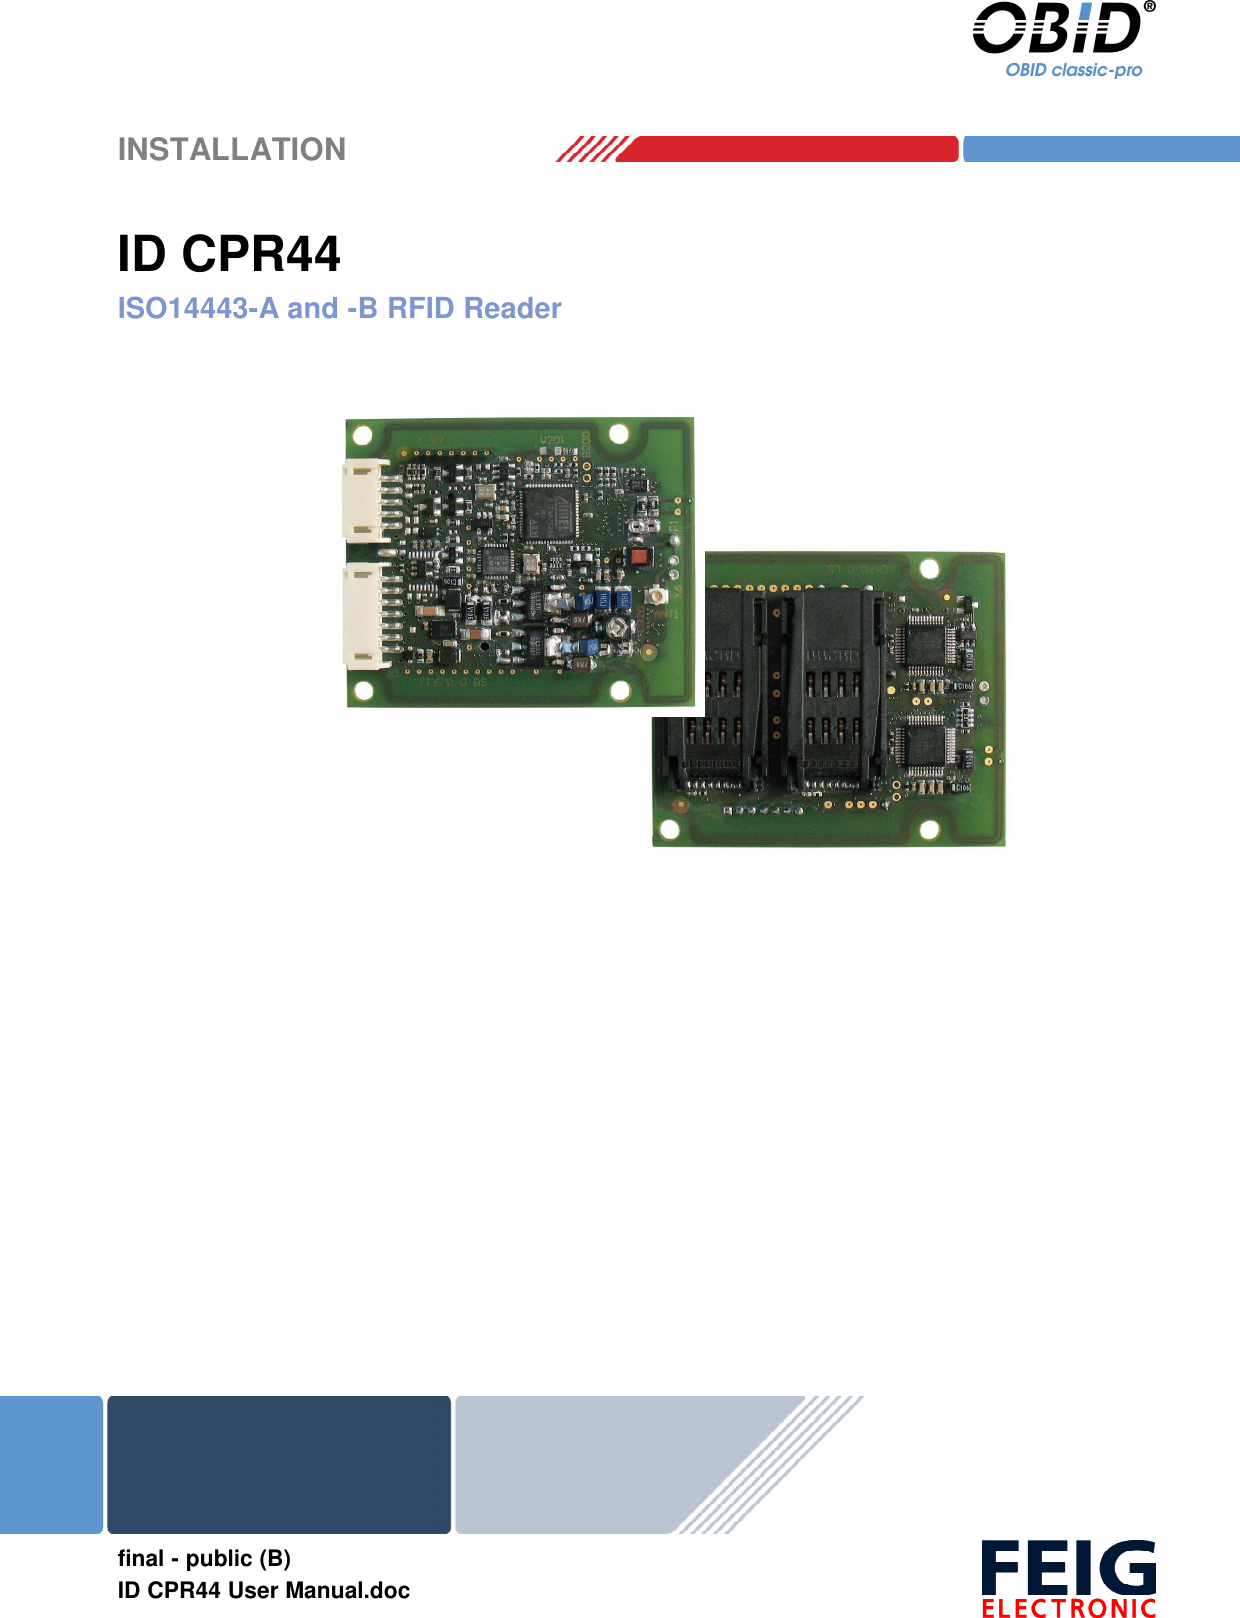    INSTALLATION  final - public (B) ID CPR44 User Manual.doc  ID CPR44 ISO14443-A and -B RFID Reader                